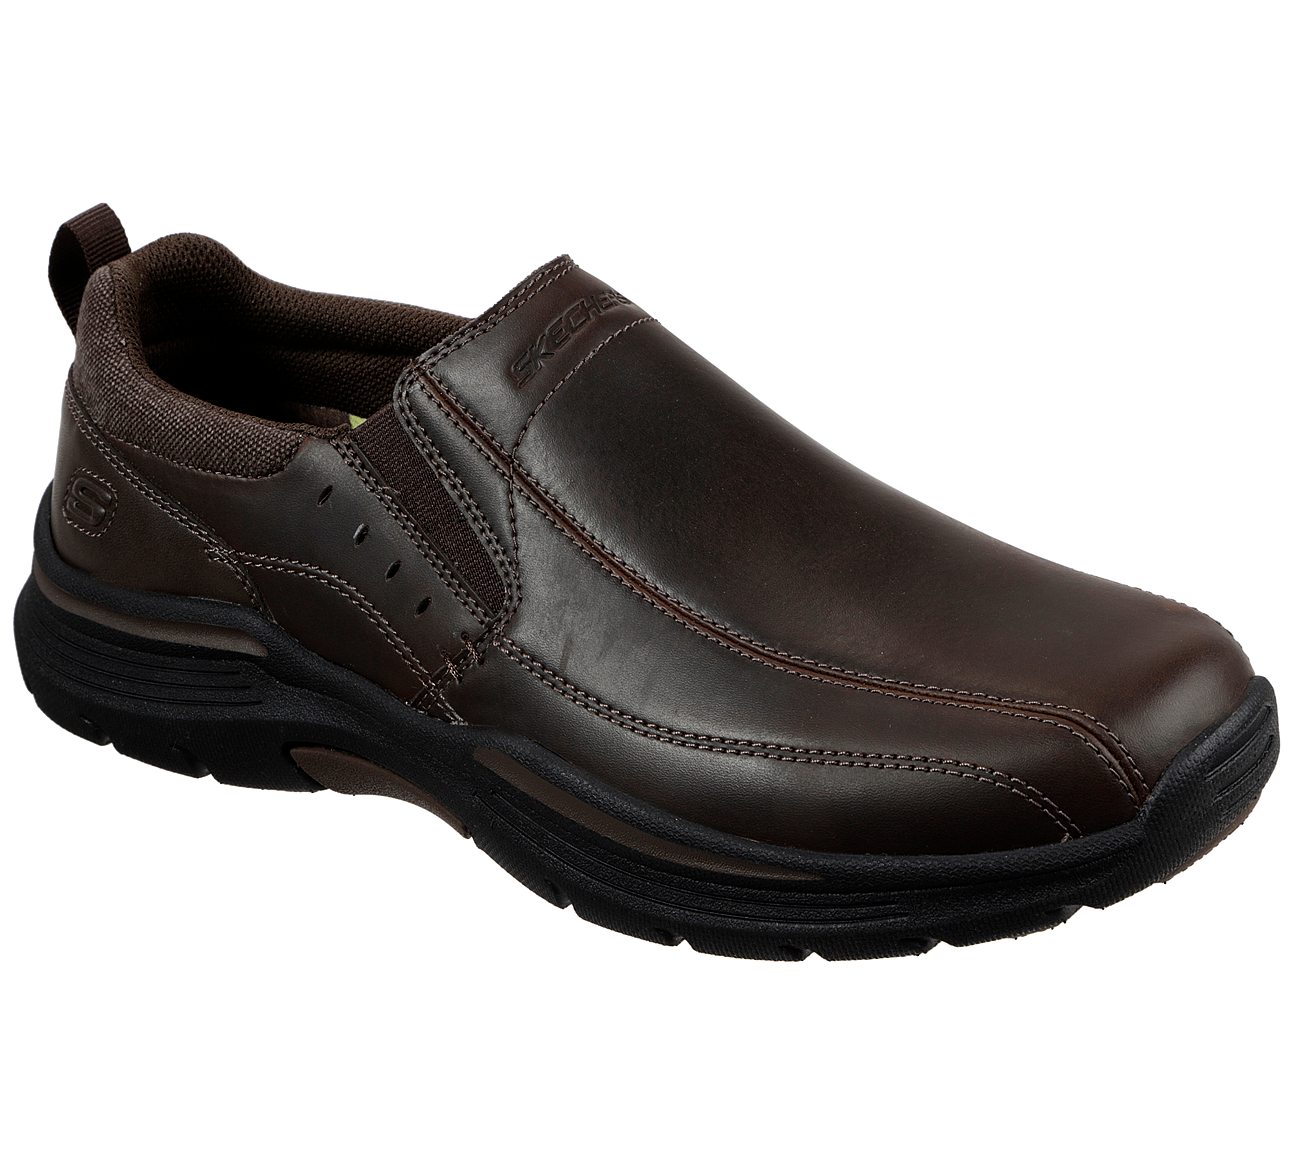 Buy SKECHERS Relaxed Fit: Expended - Venline USA Casuals Shoes